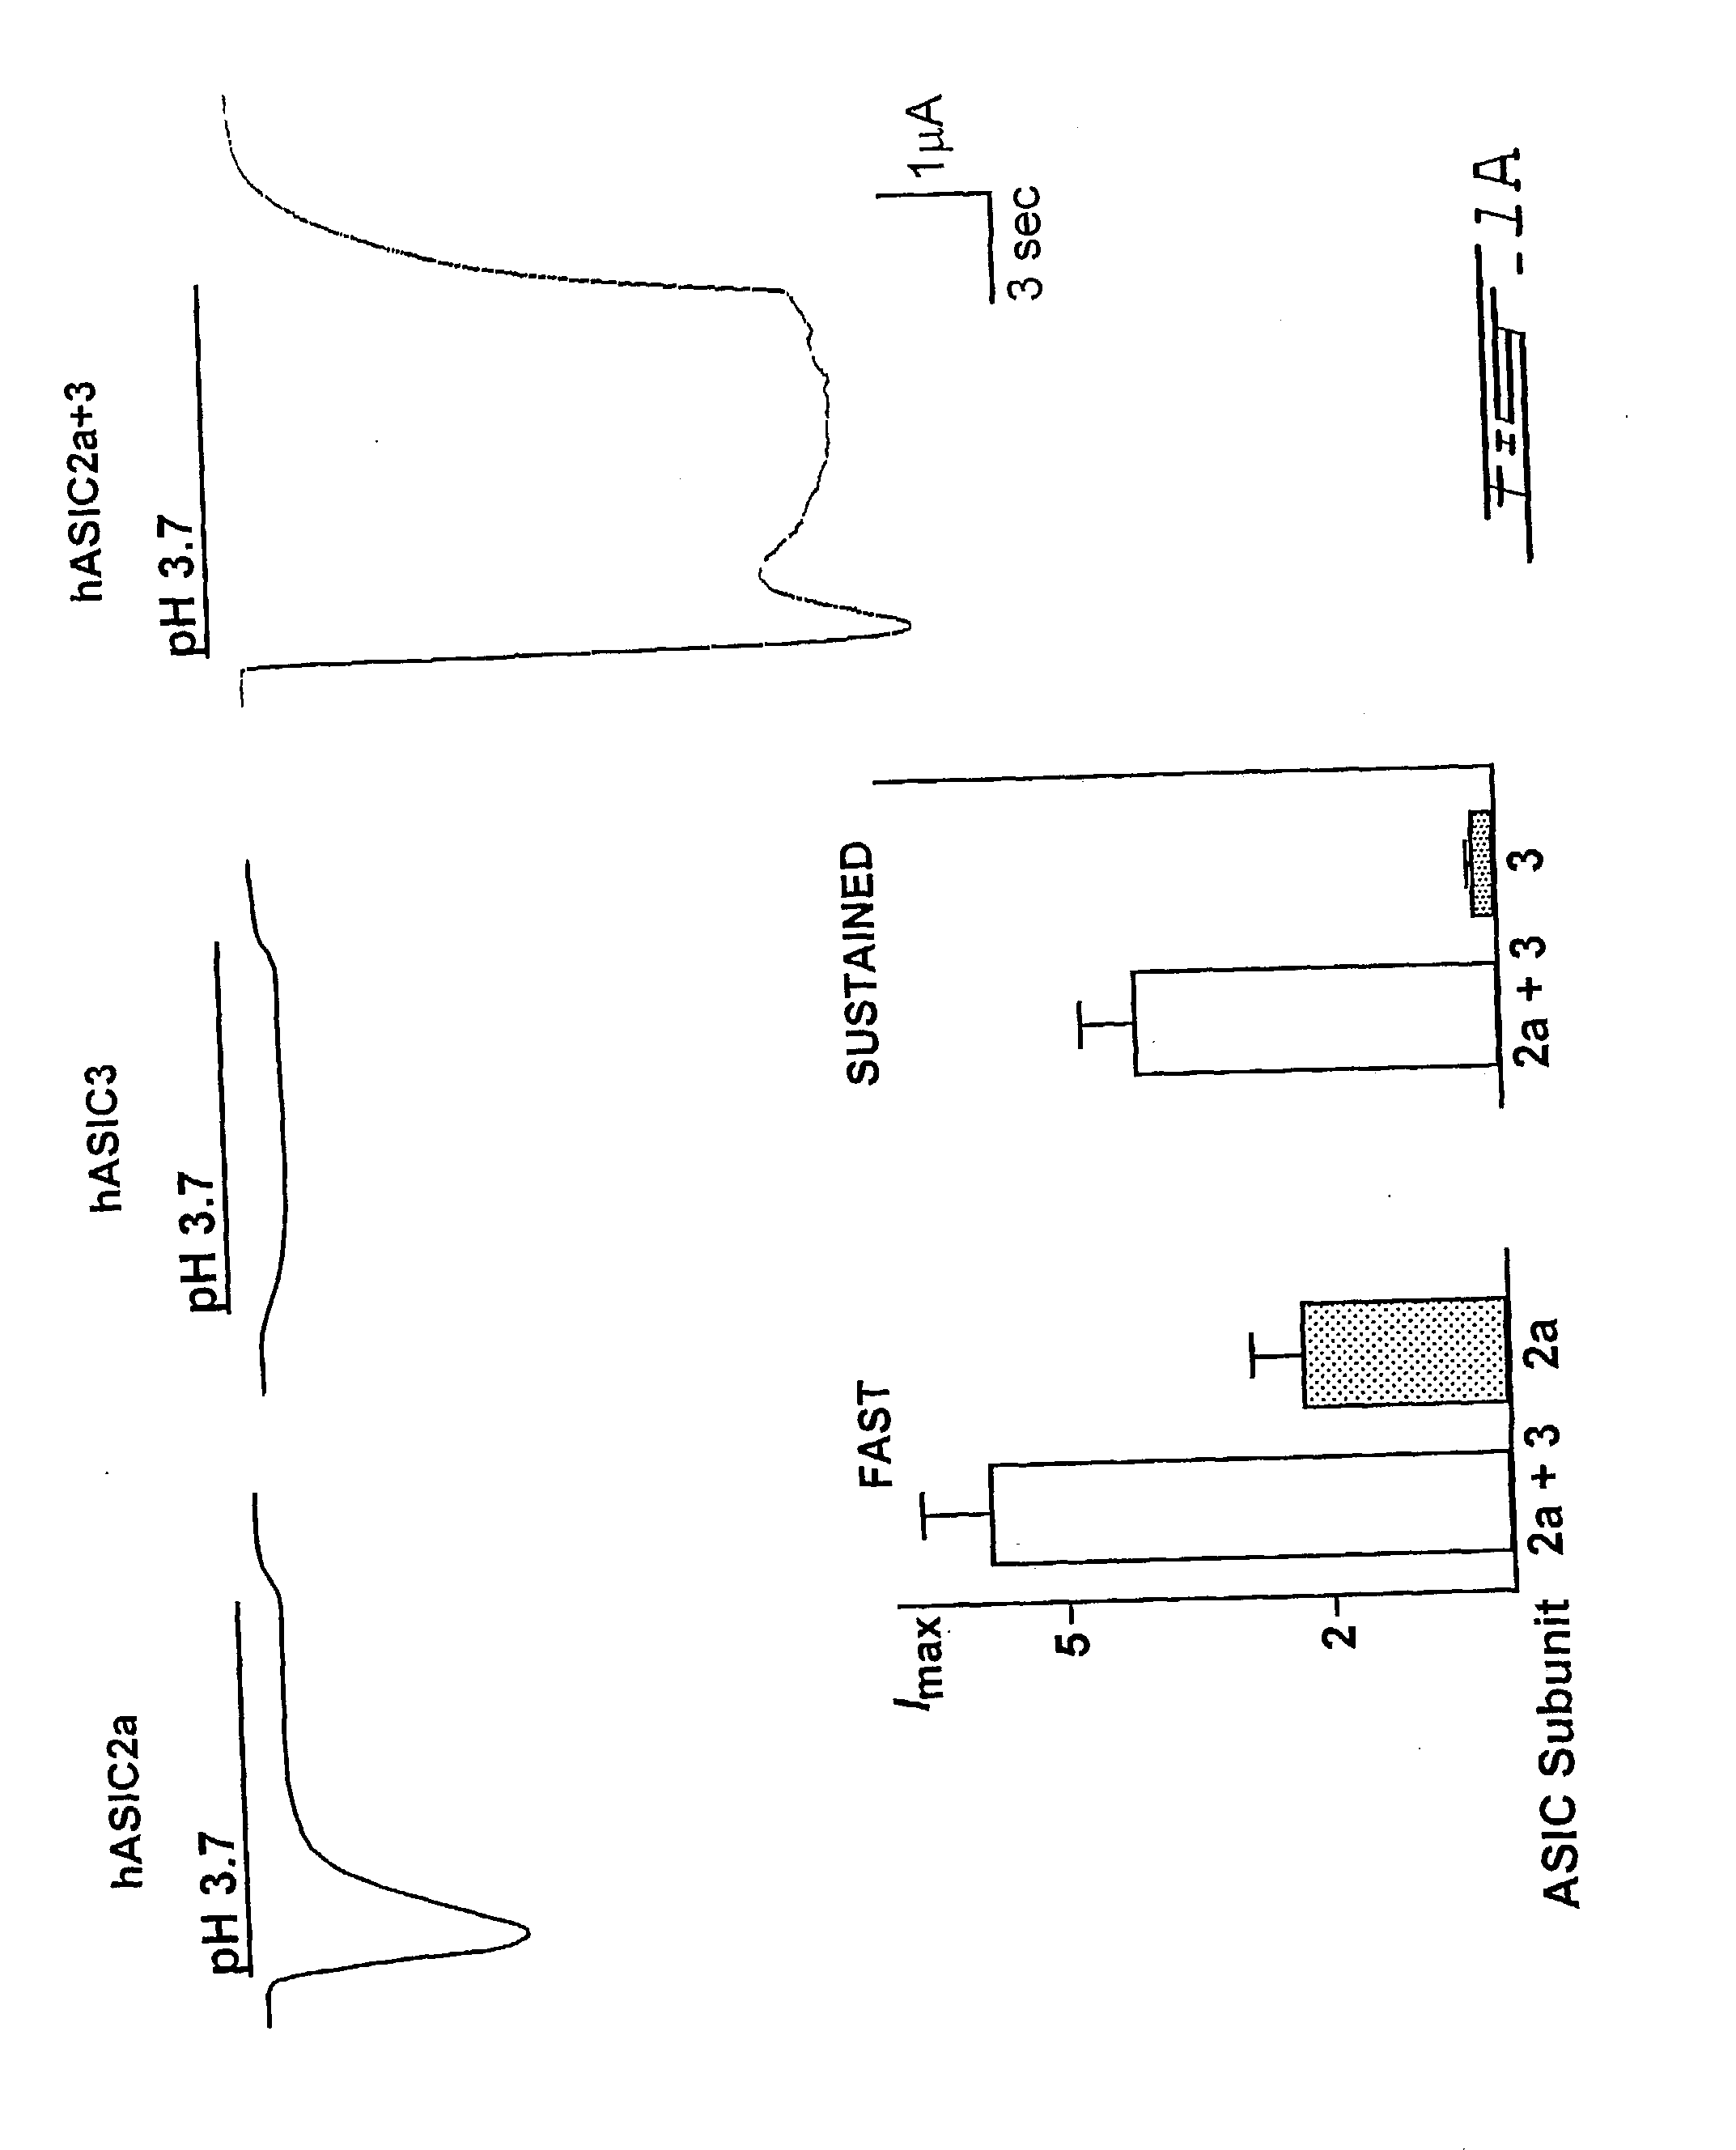 Novel heteromultimeric ion channel receptor and uses thereof